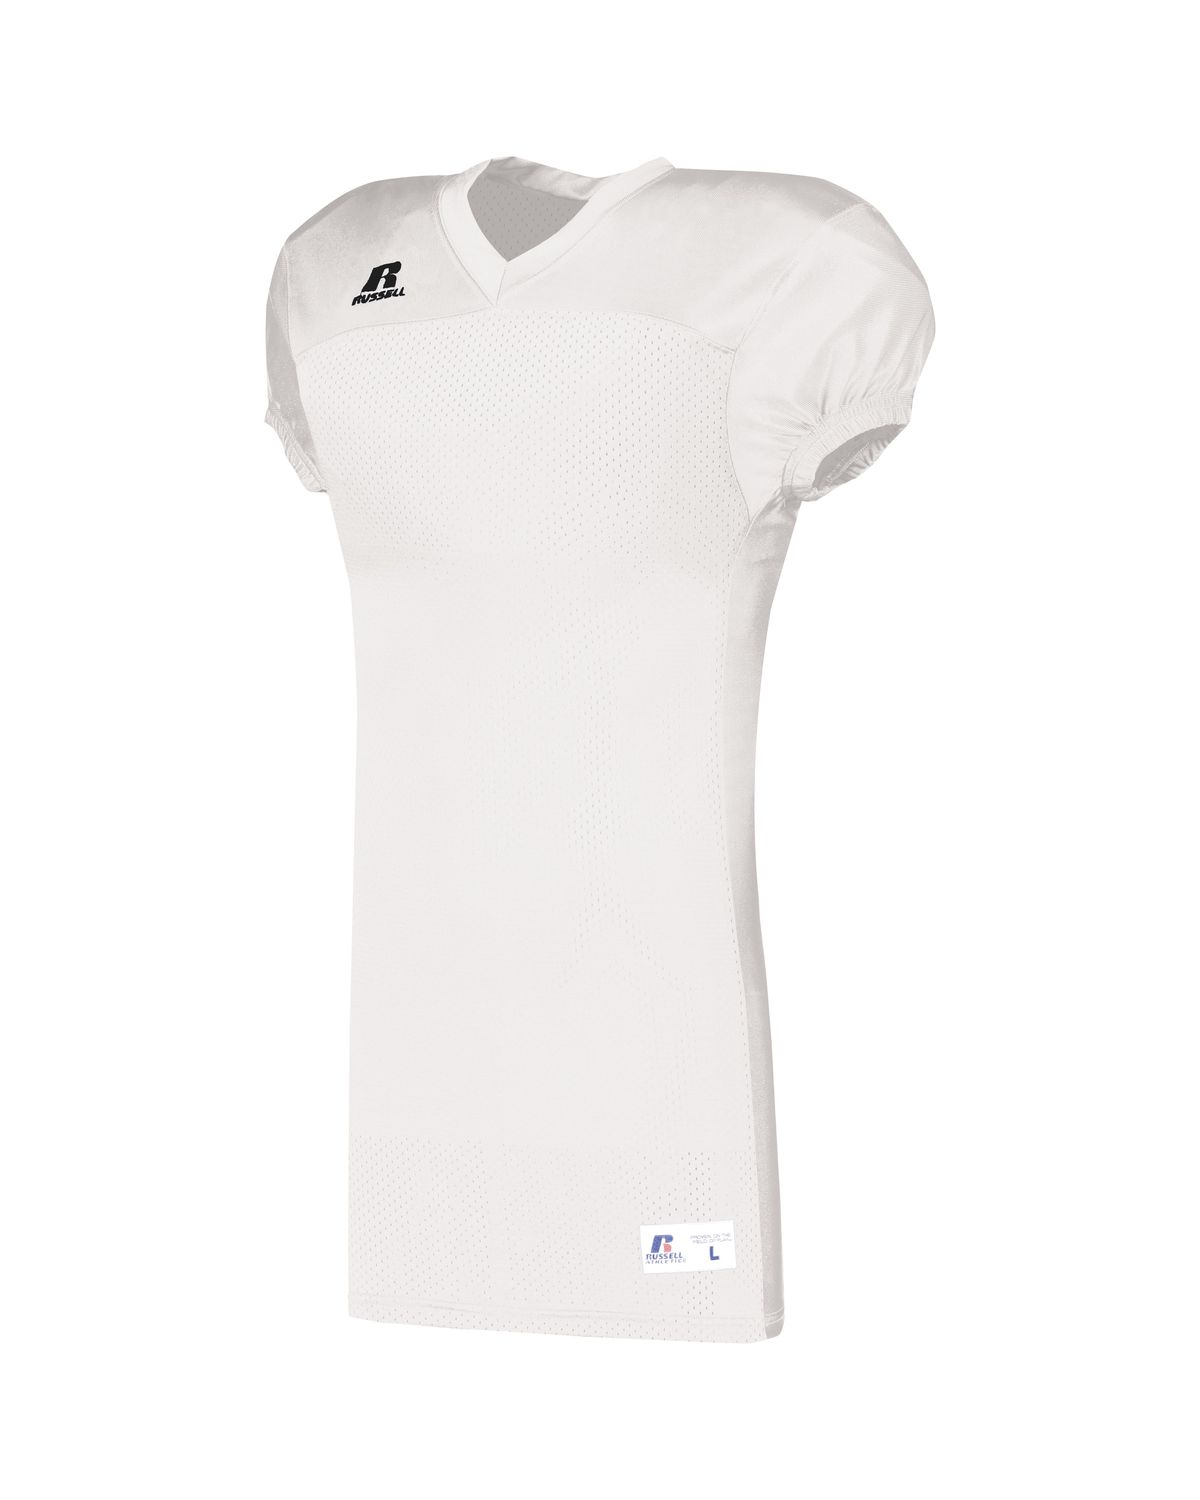 'Russell Athletic S8623M Solid jersey with side inserts'